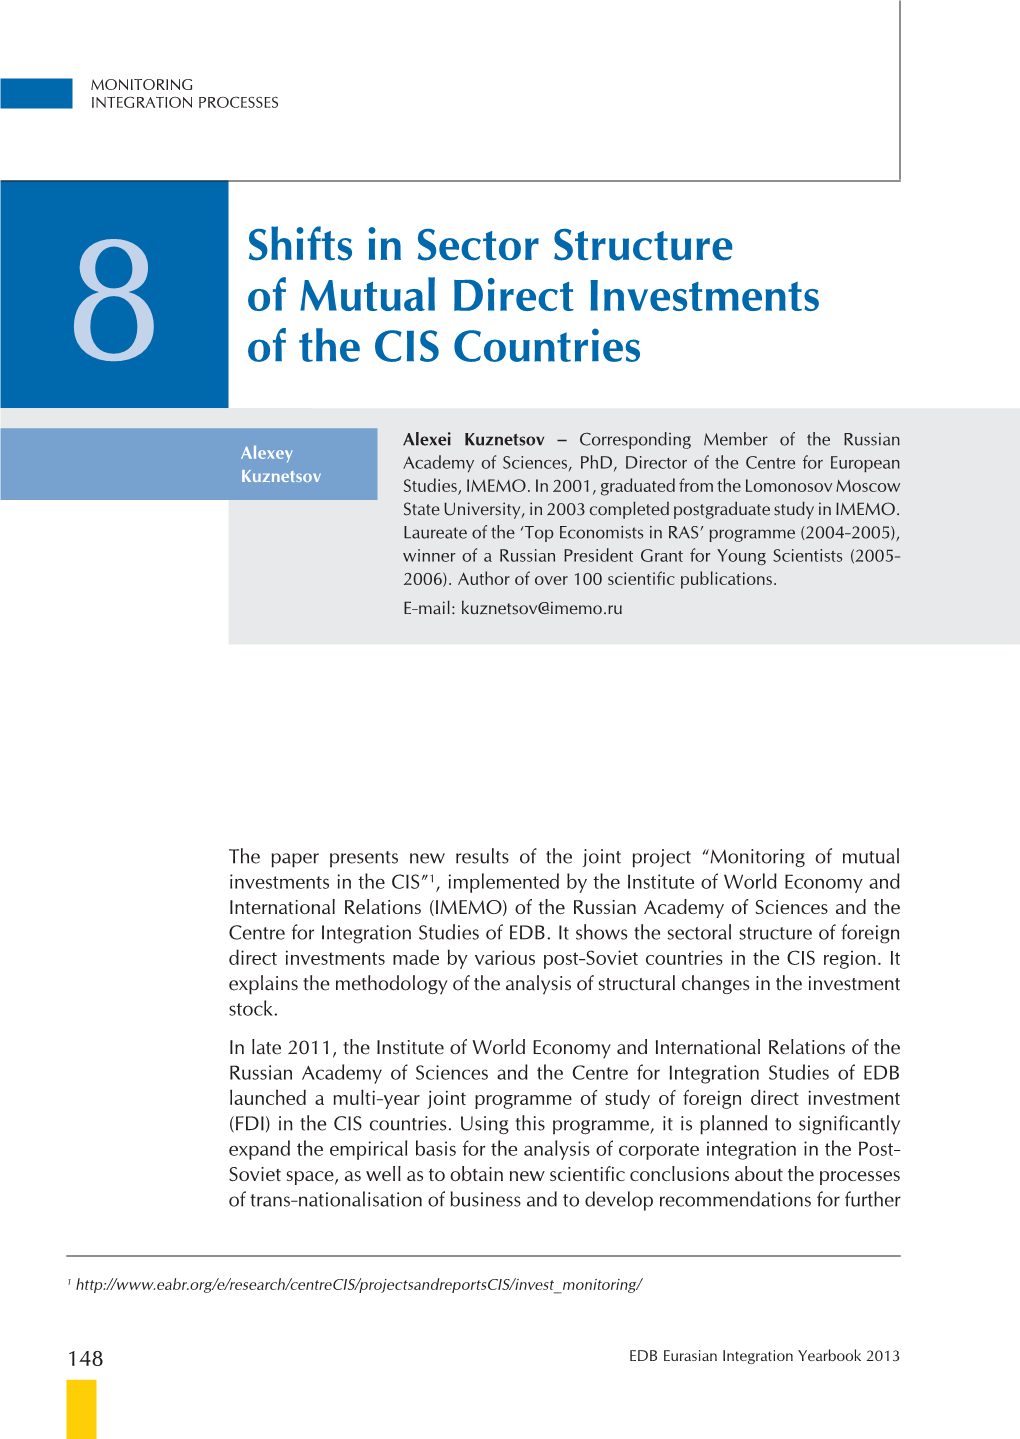 8 Shifts in Sector Structure of Mutual Direct Investments of the CIS